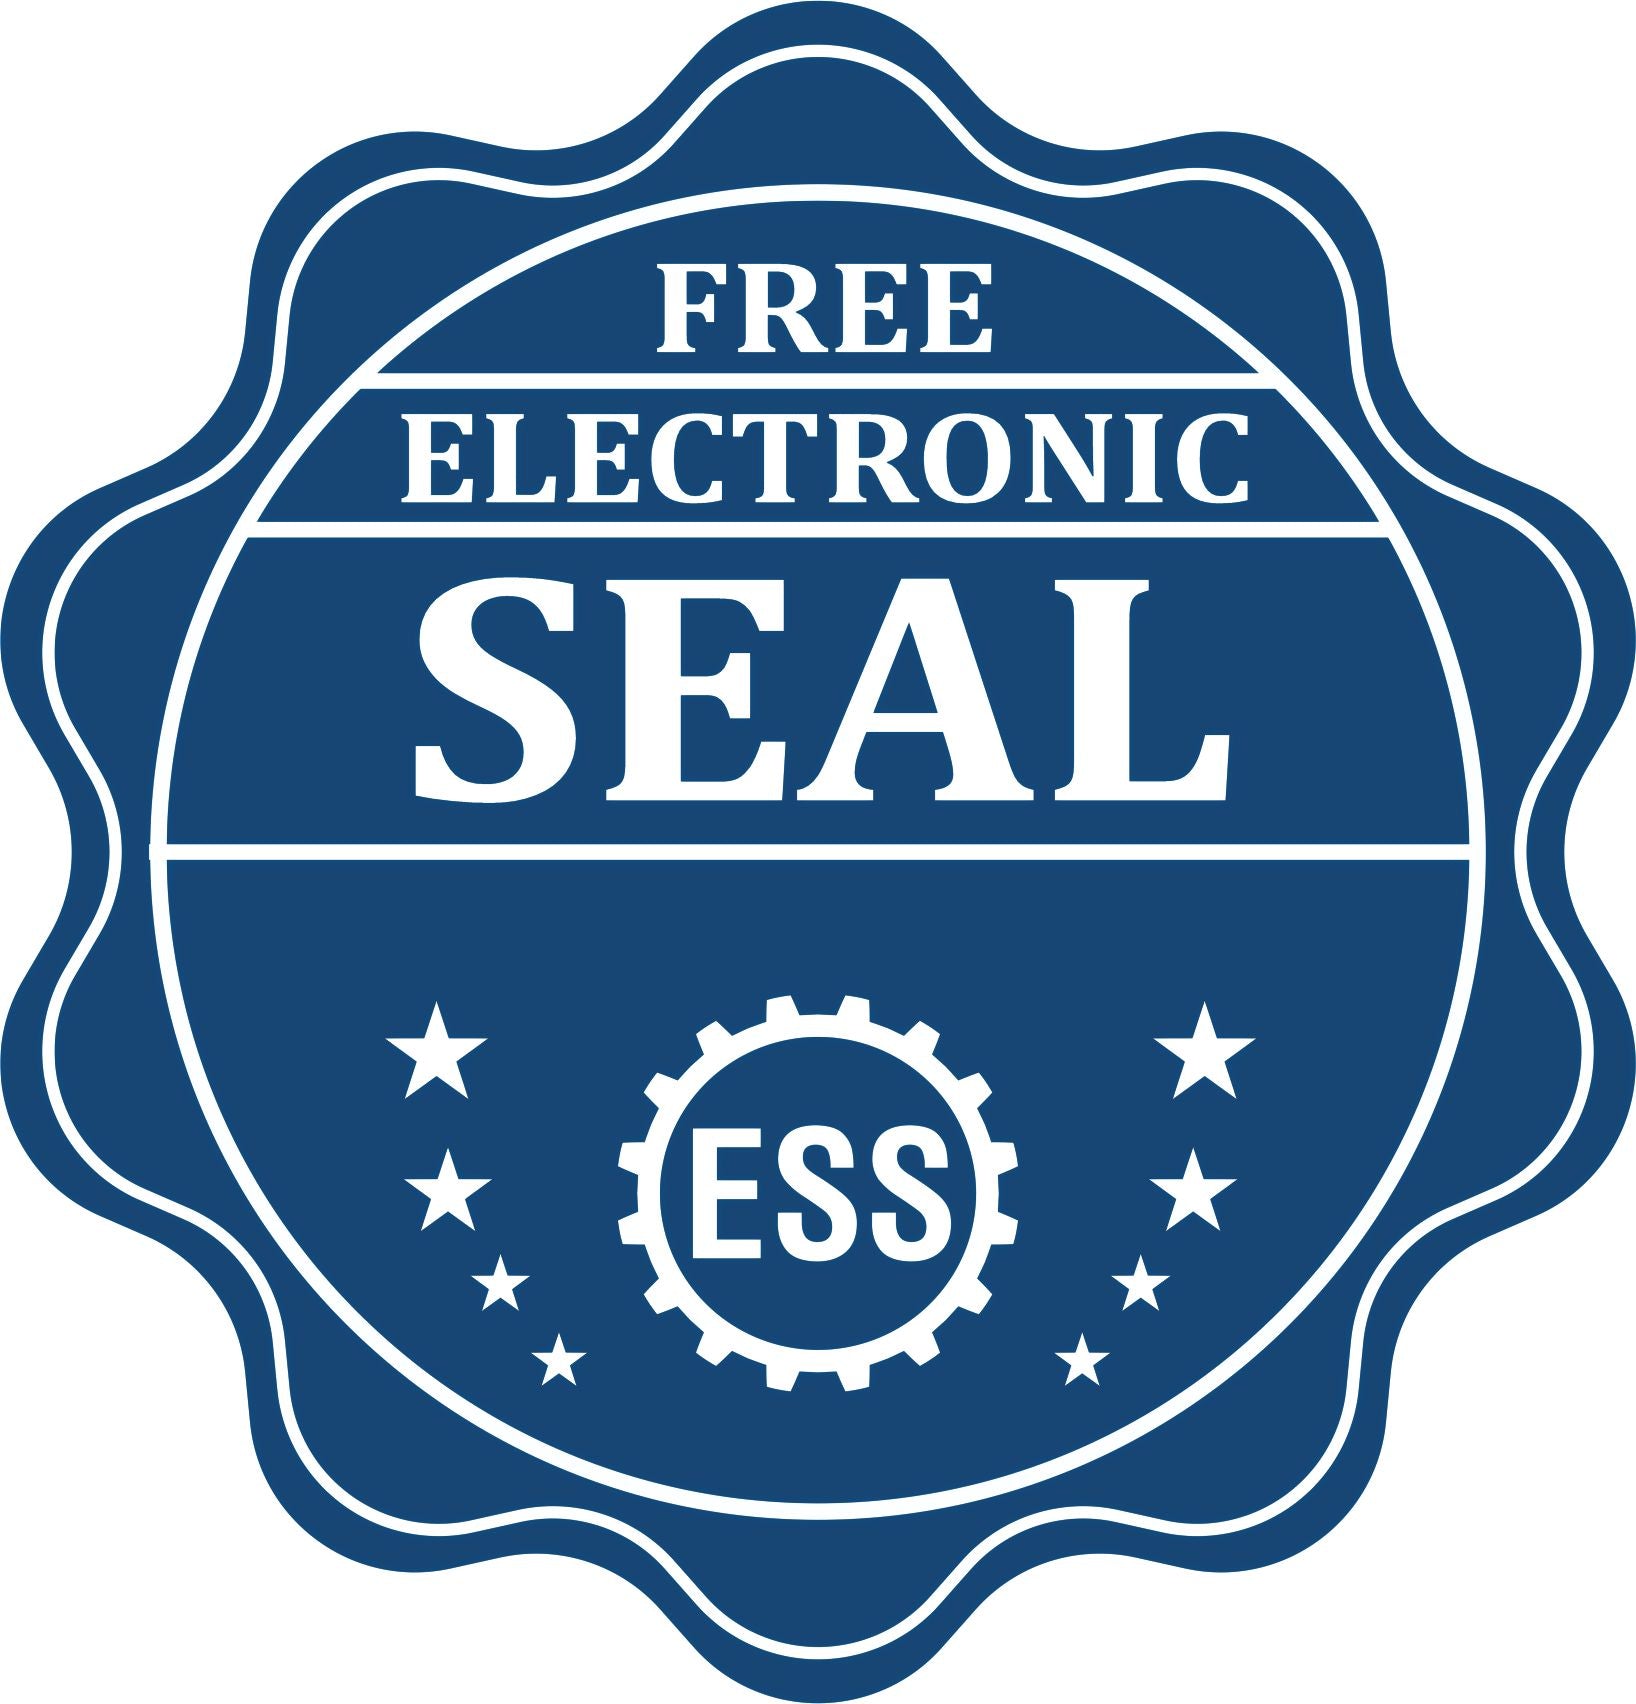 A badge showing a free electronic seal for the Hybrid Massachusetts Engineer Seal with stars and the ESS gear on the emblem.